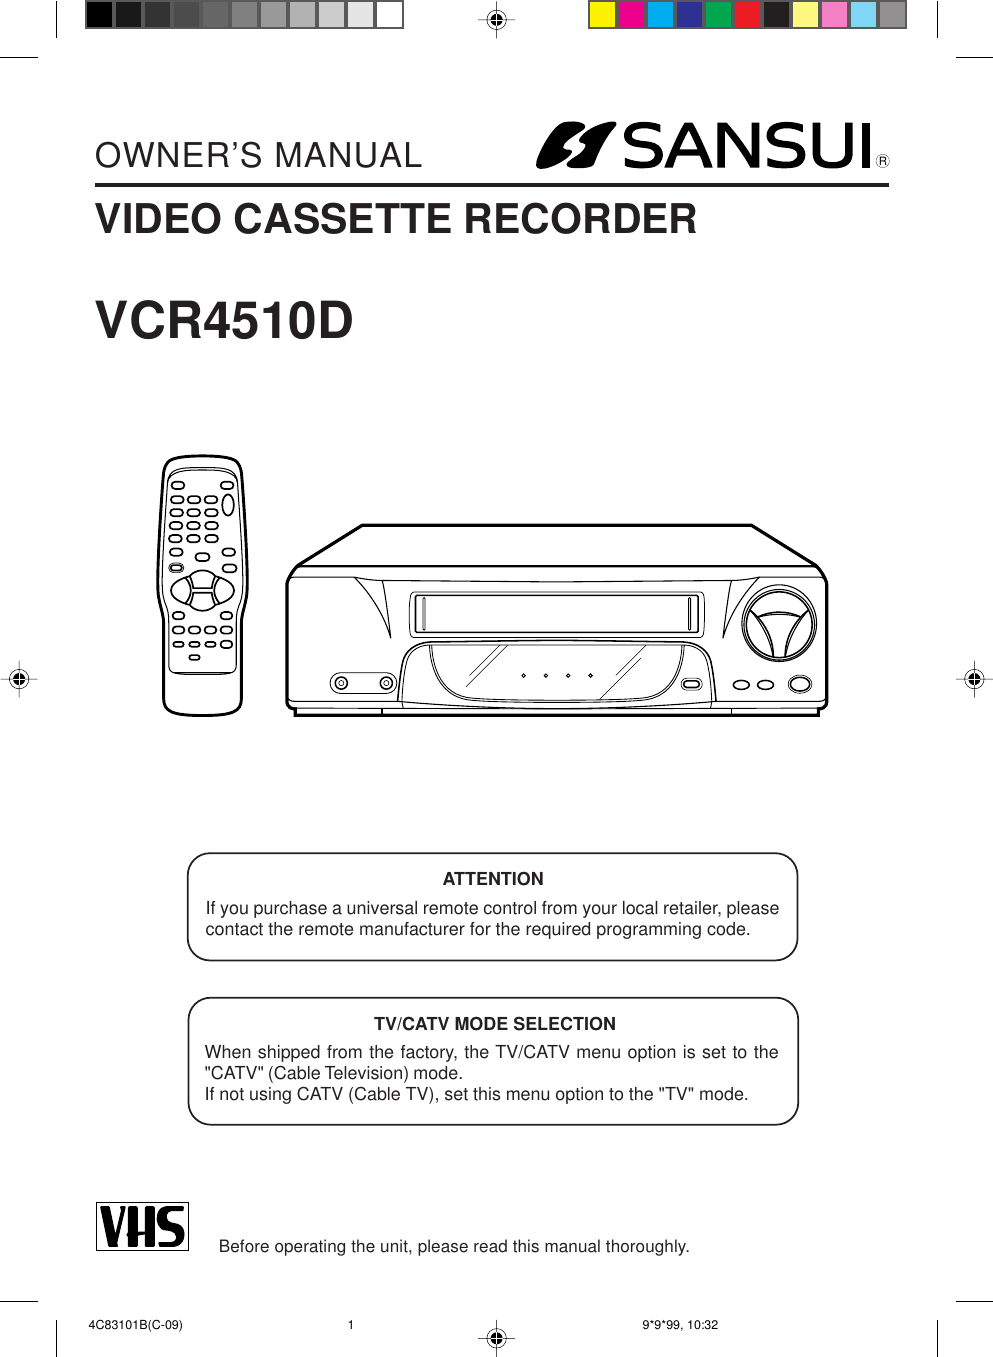 RVIDEO CASSETTE RECORDEROWNER’S MANUALBefore operating the unit, please read this manual thoroughly.VCR4510DTV/CATV MODE SELECTIONWhen shipped from the factory, the TV/CATV menu option is set to the&quot;CATV&quot; (Cable Television) mode.If not using CATV (Cable TV), set this menu option to the &quot;TV&quot; mode.ATTENTIONIf you purchase a universal remote control from your local retailer, pleasecontact the remote manufacturer for the required programming code. 4C83101B(C-09) 9*9*99, 10:321